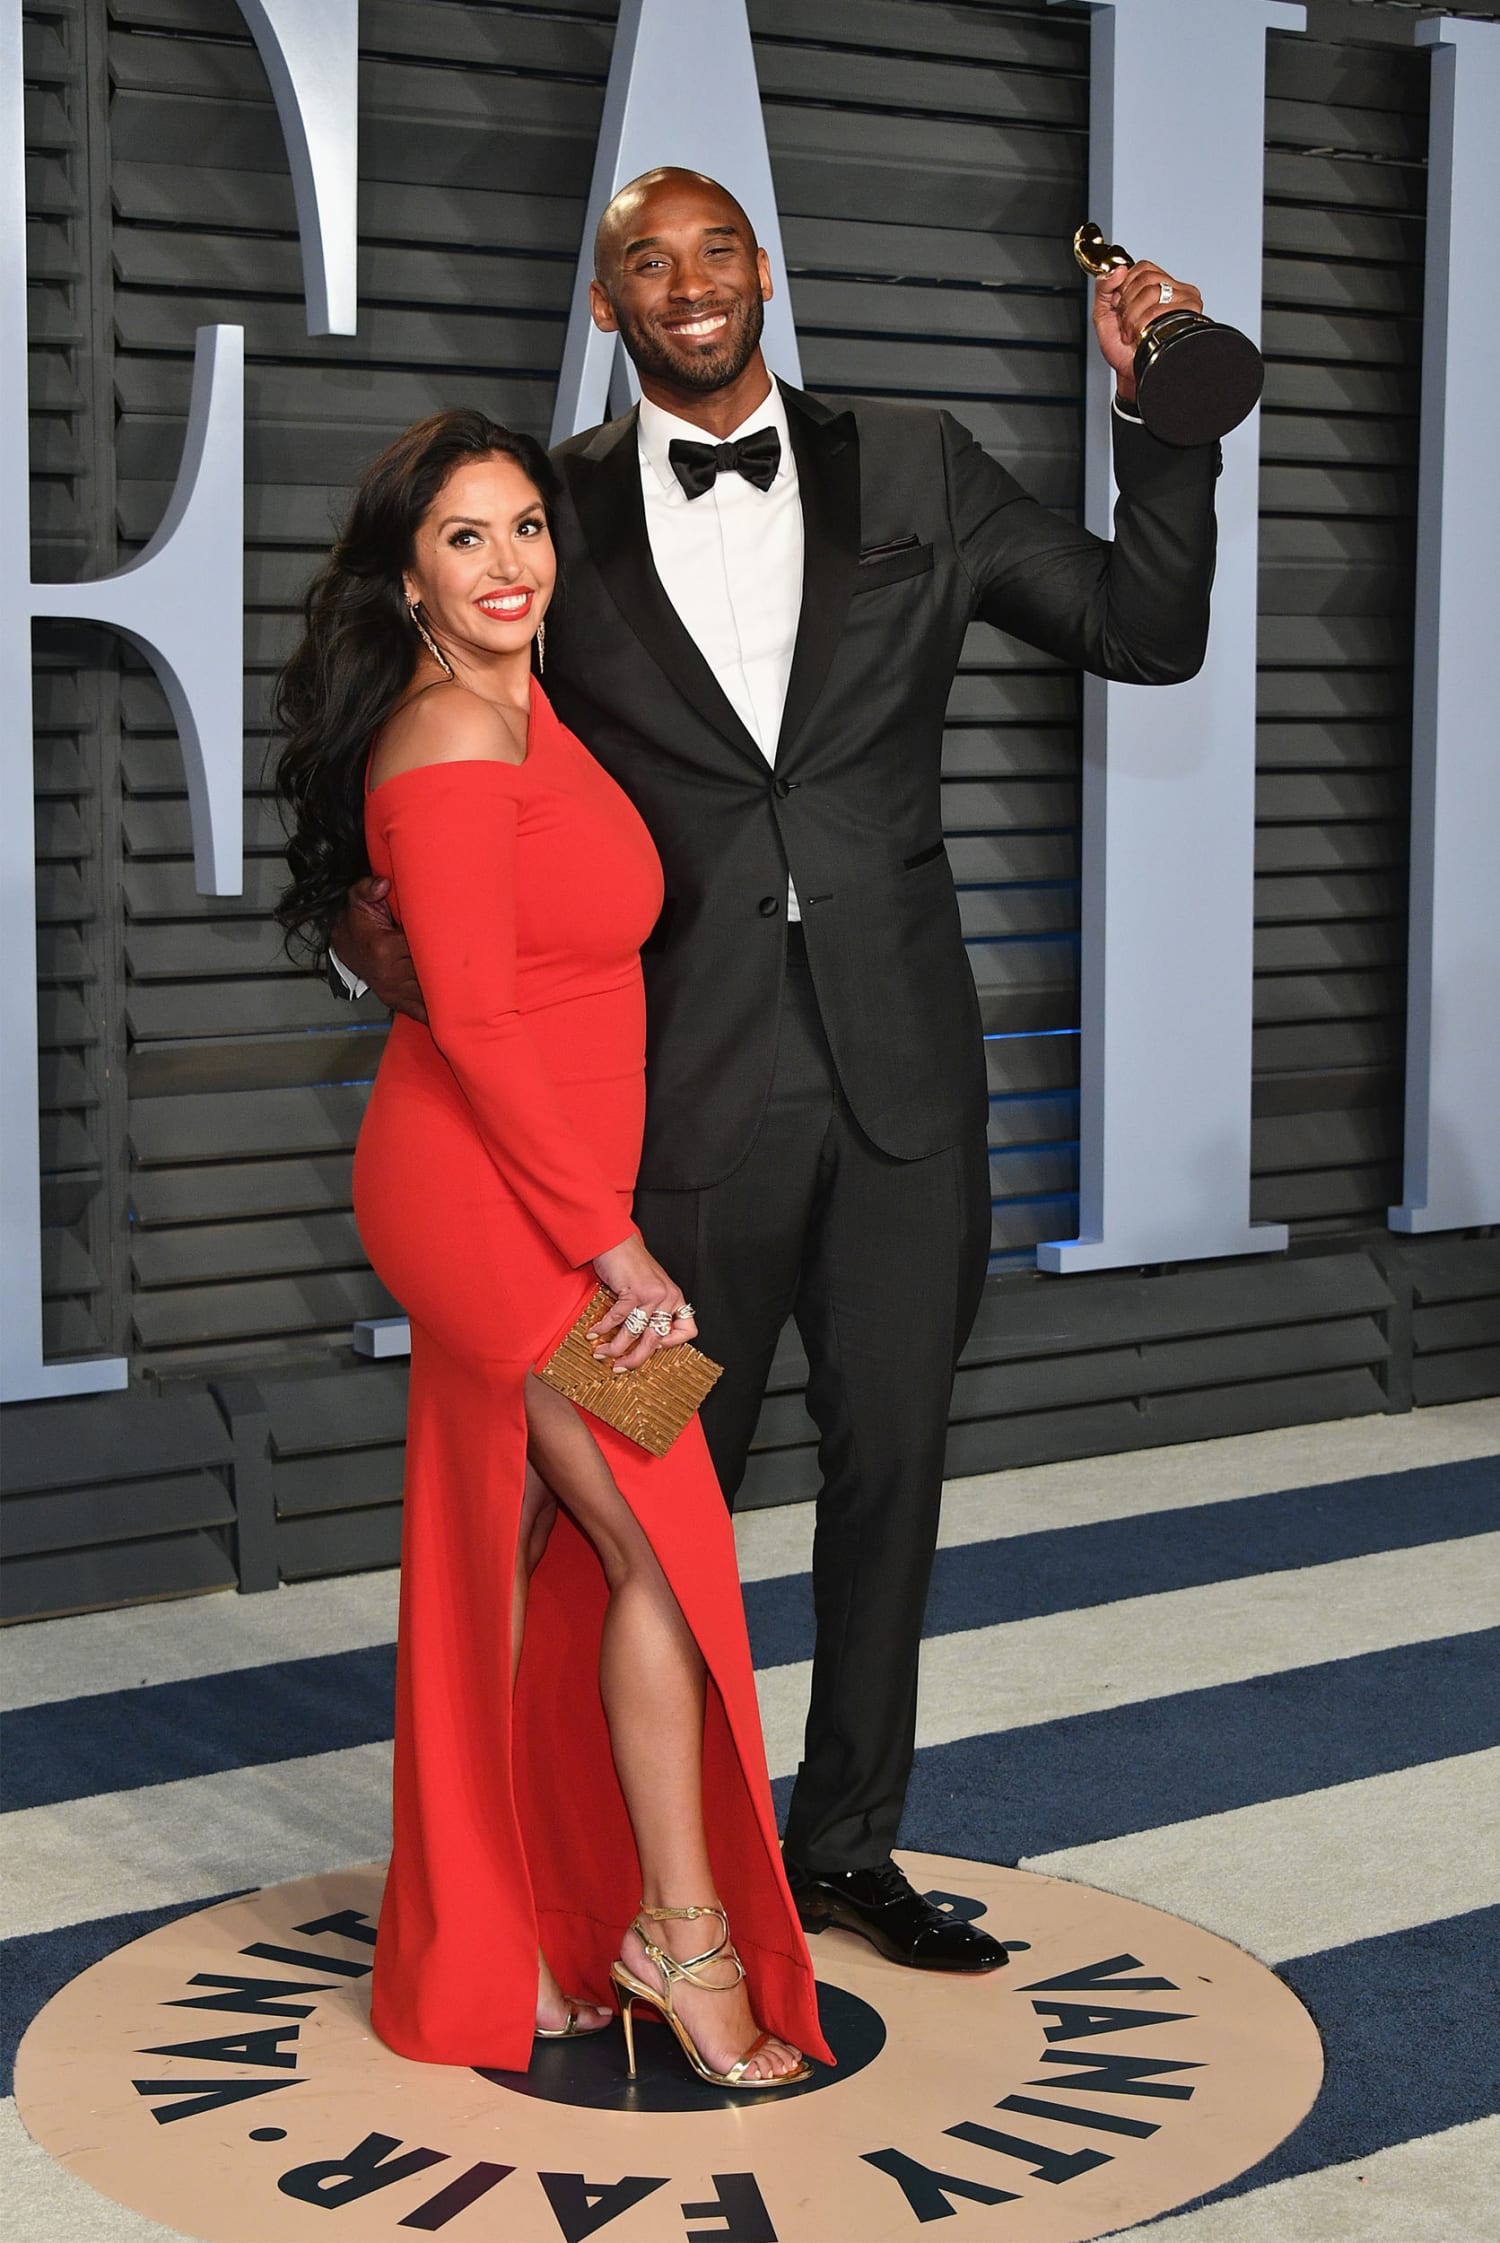 Kobe Bryant gave Vanessa Bryant a dress from Sex and the City